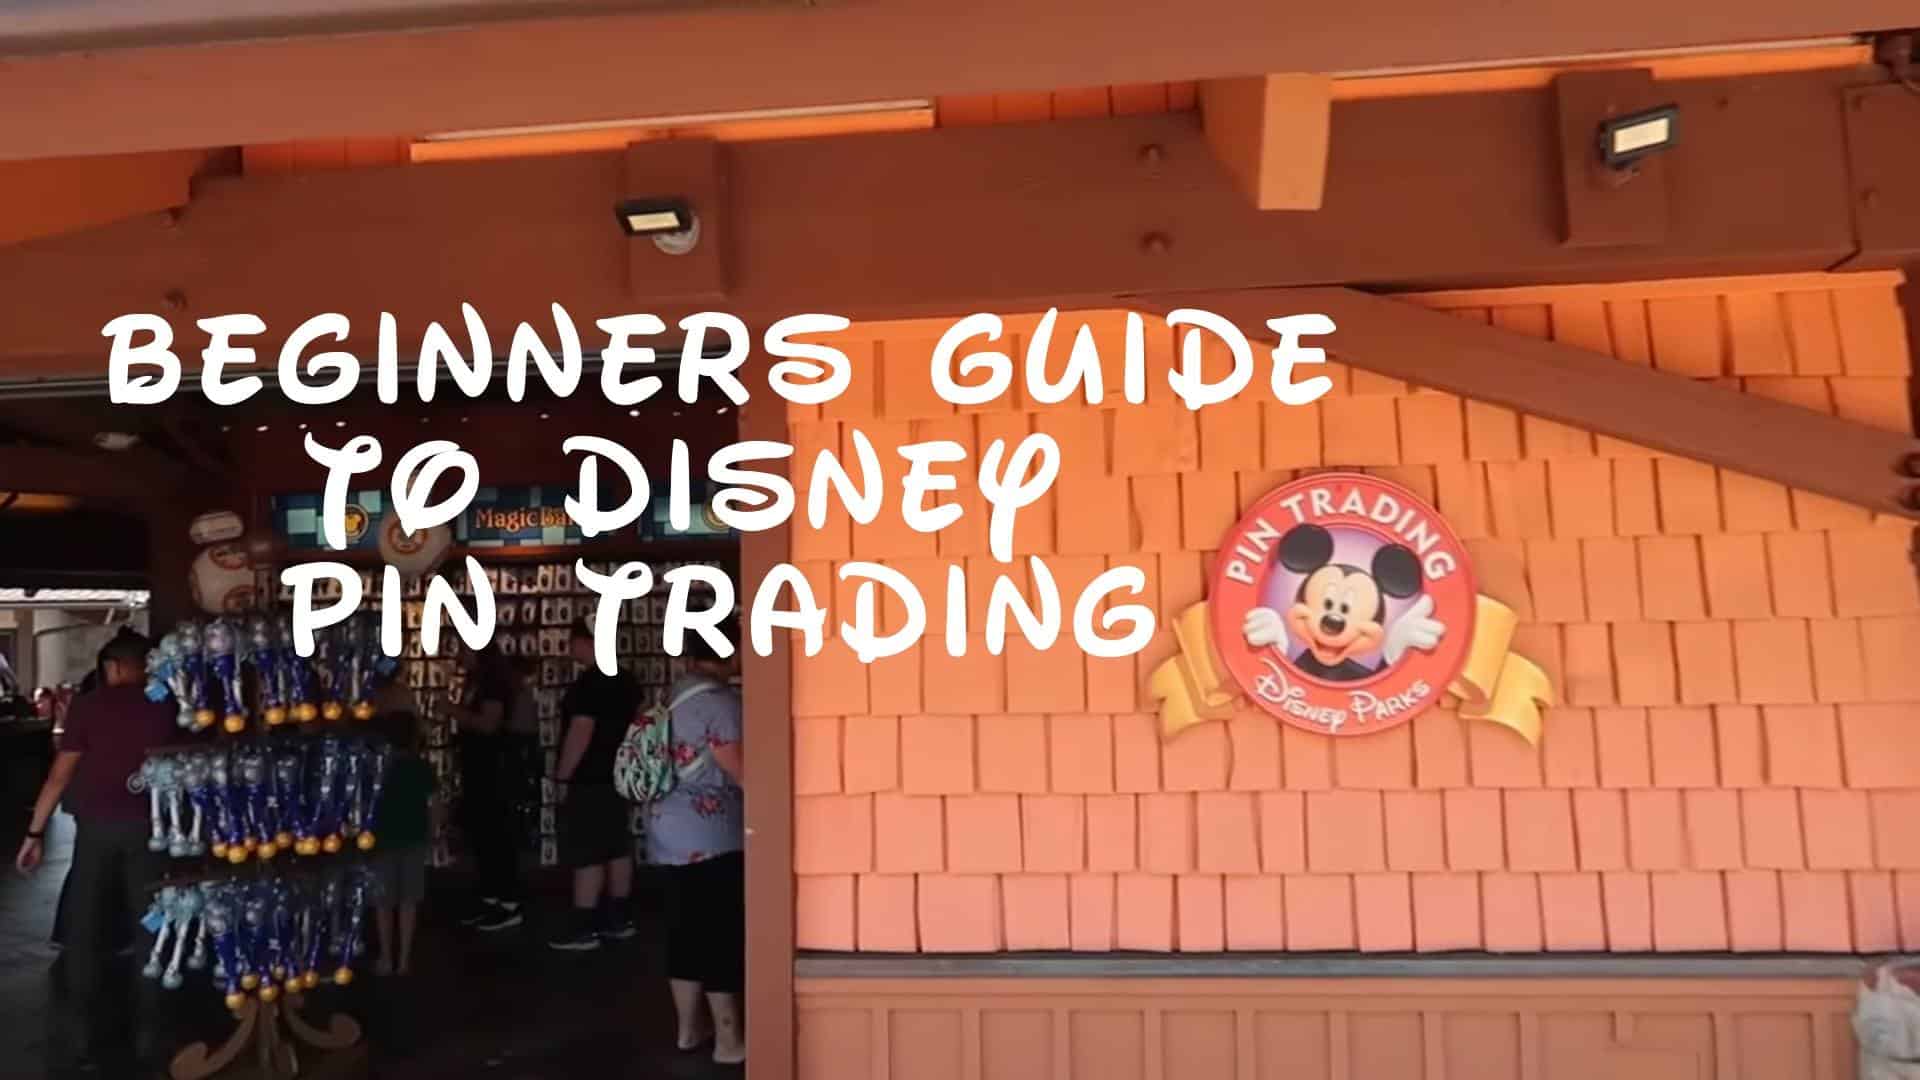 10 Top Secret Disney World Tips (Number 5 Is Awesome!) 40